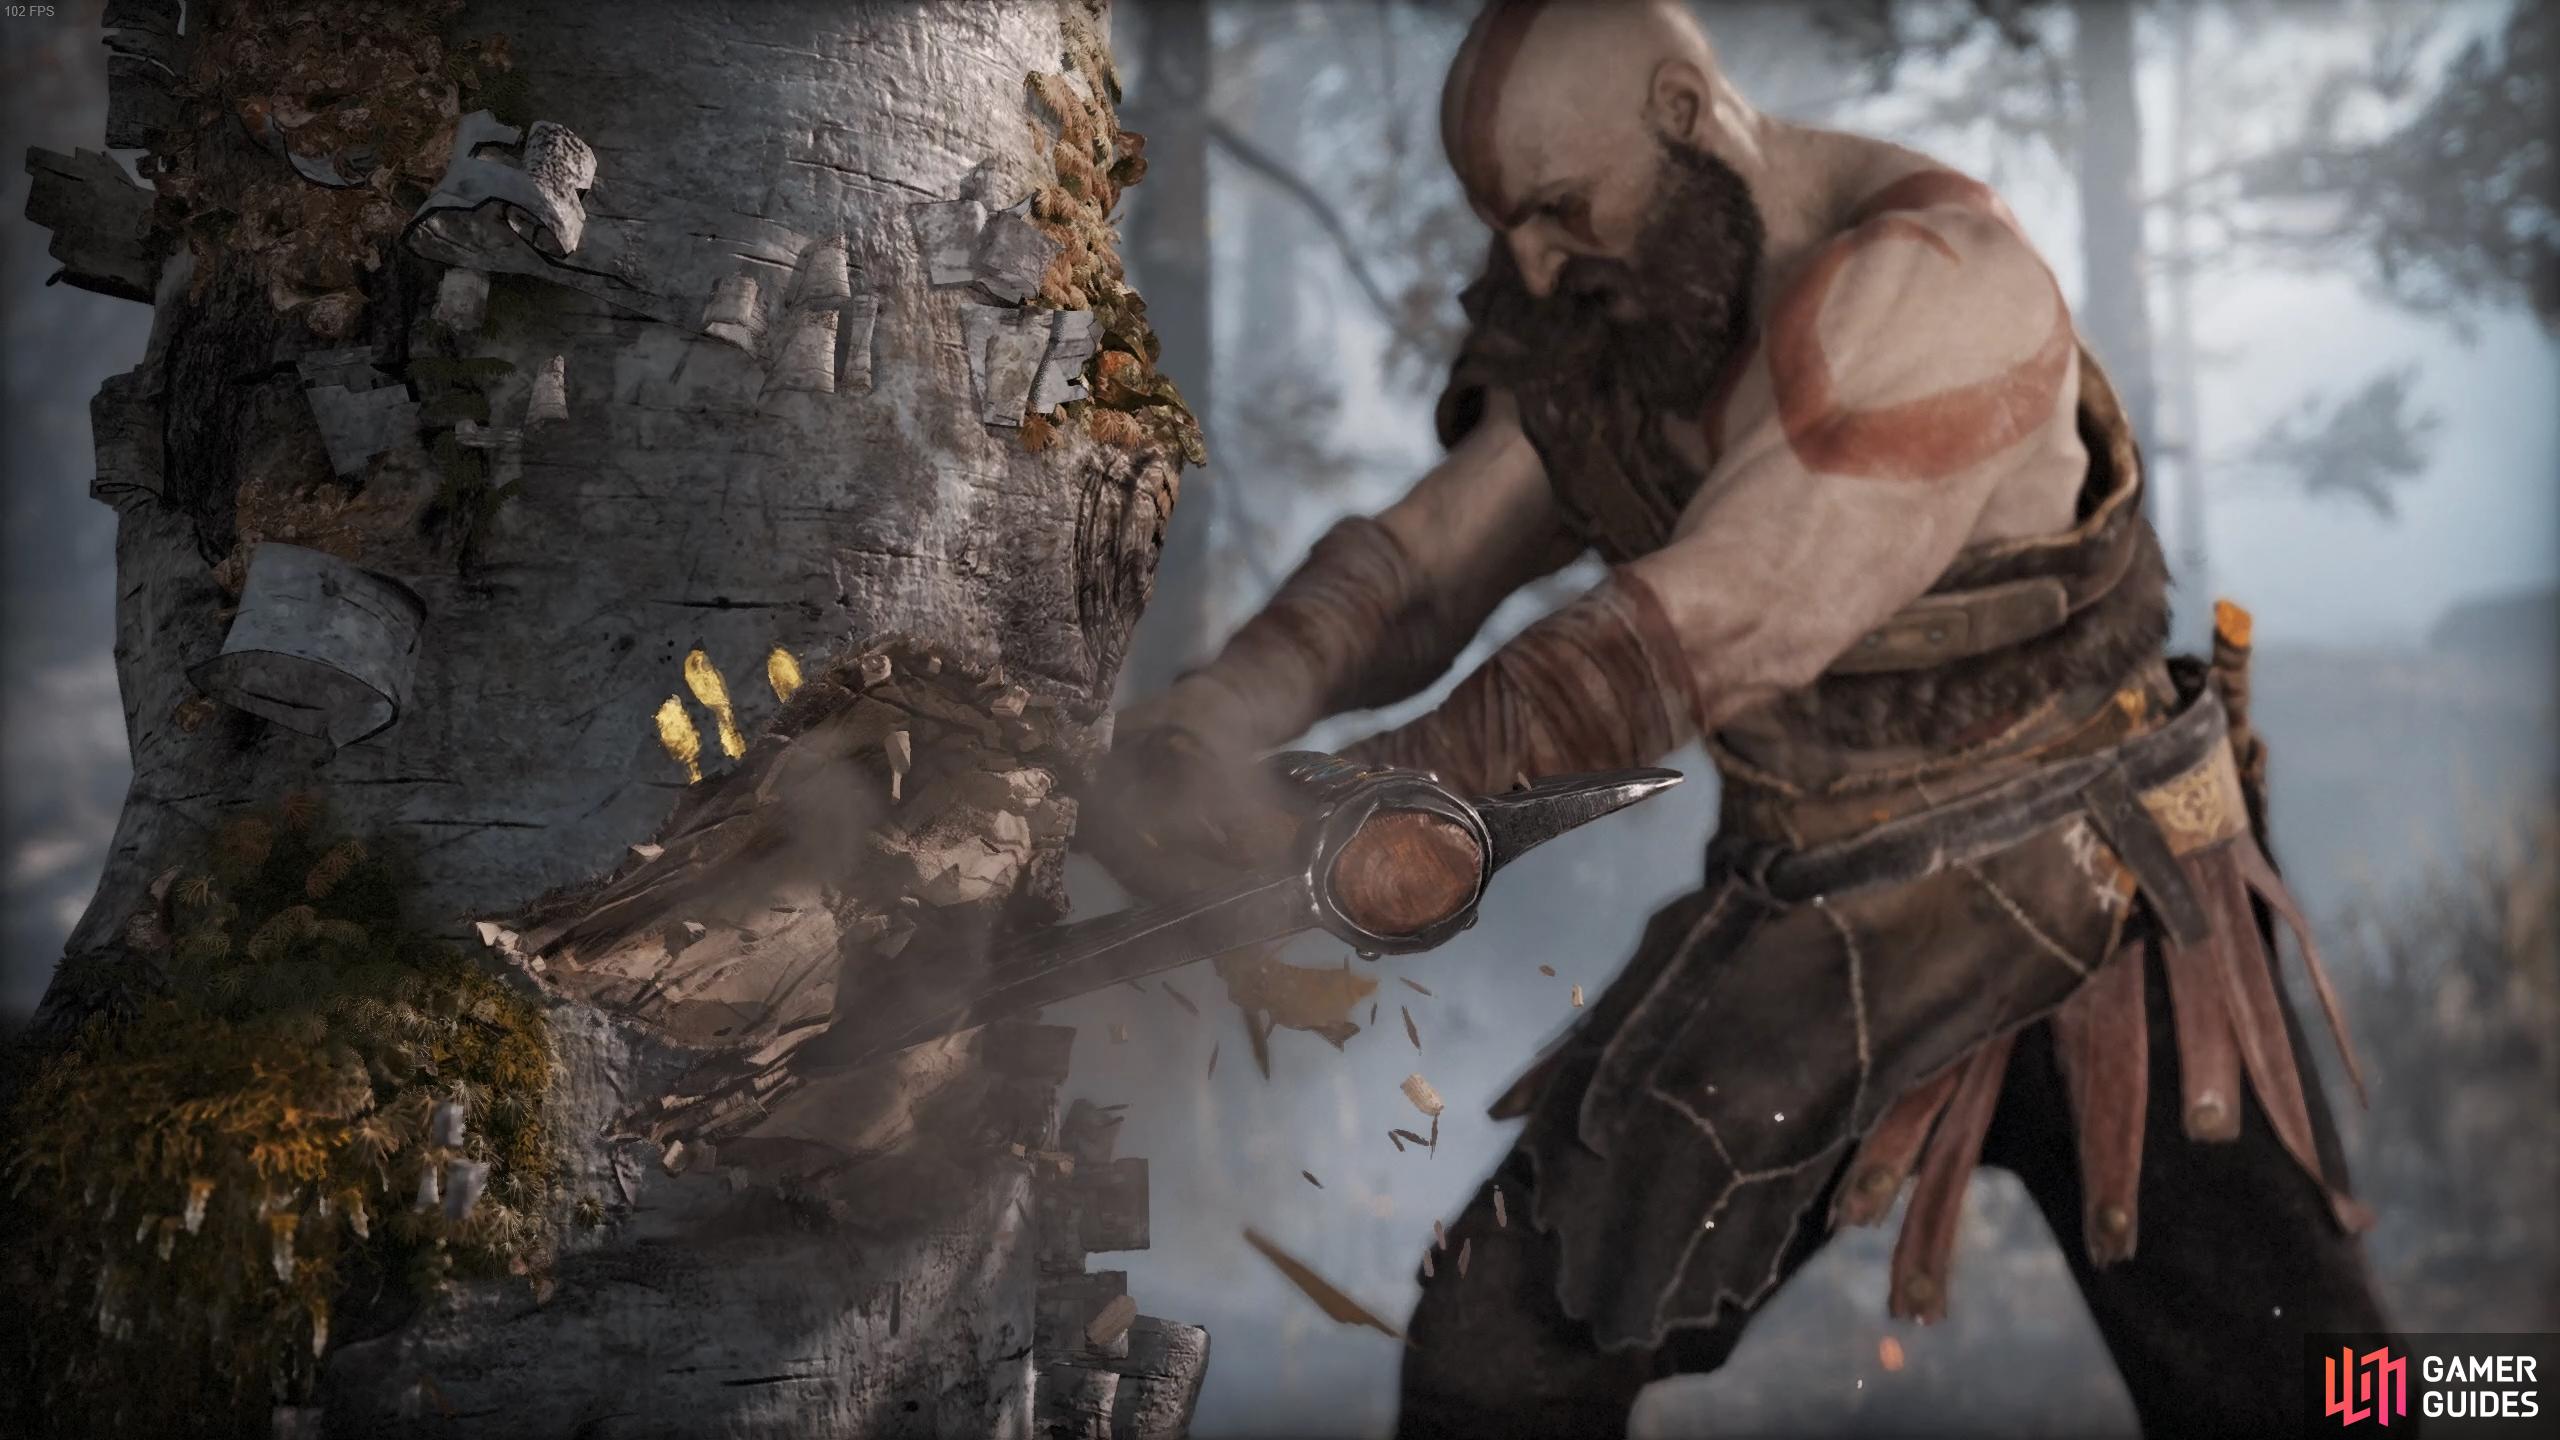 Although a cinematic, youll still need to help Kratos fell the tree with the R1 or Mouse 1 buttons.